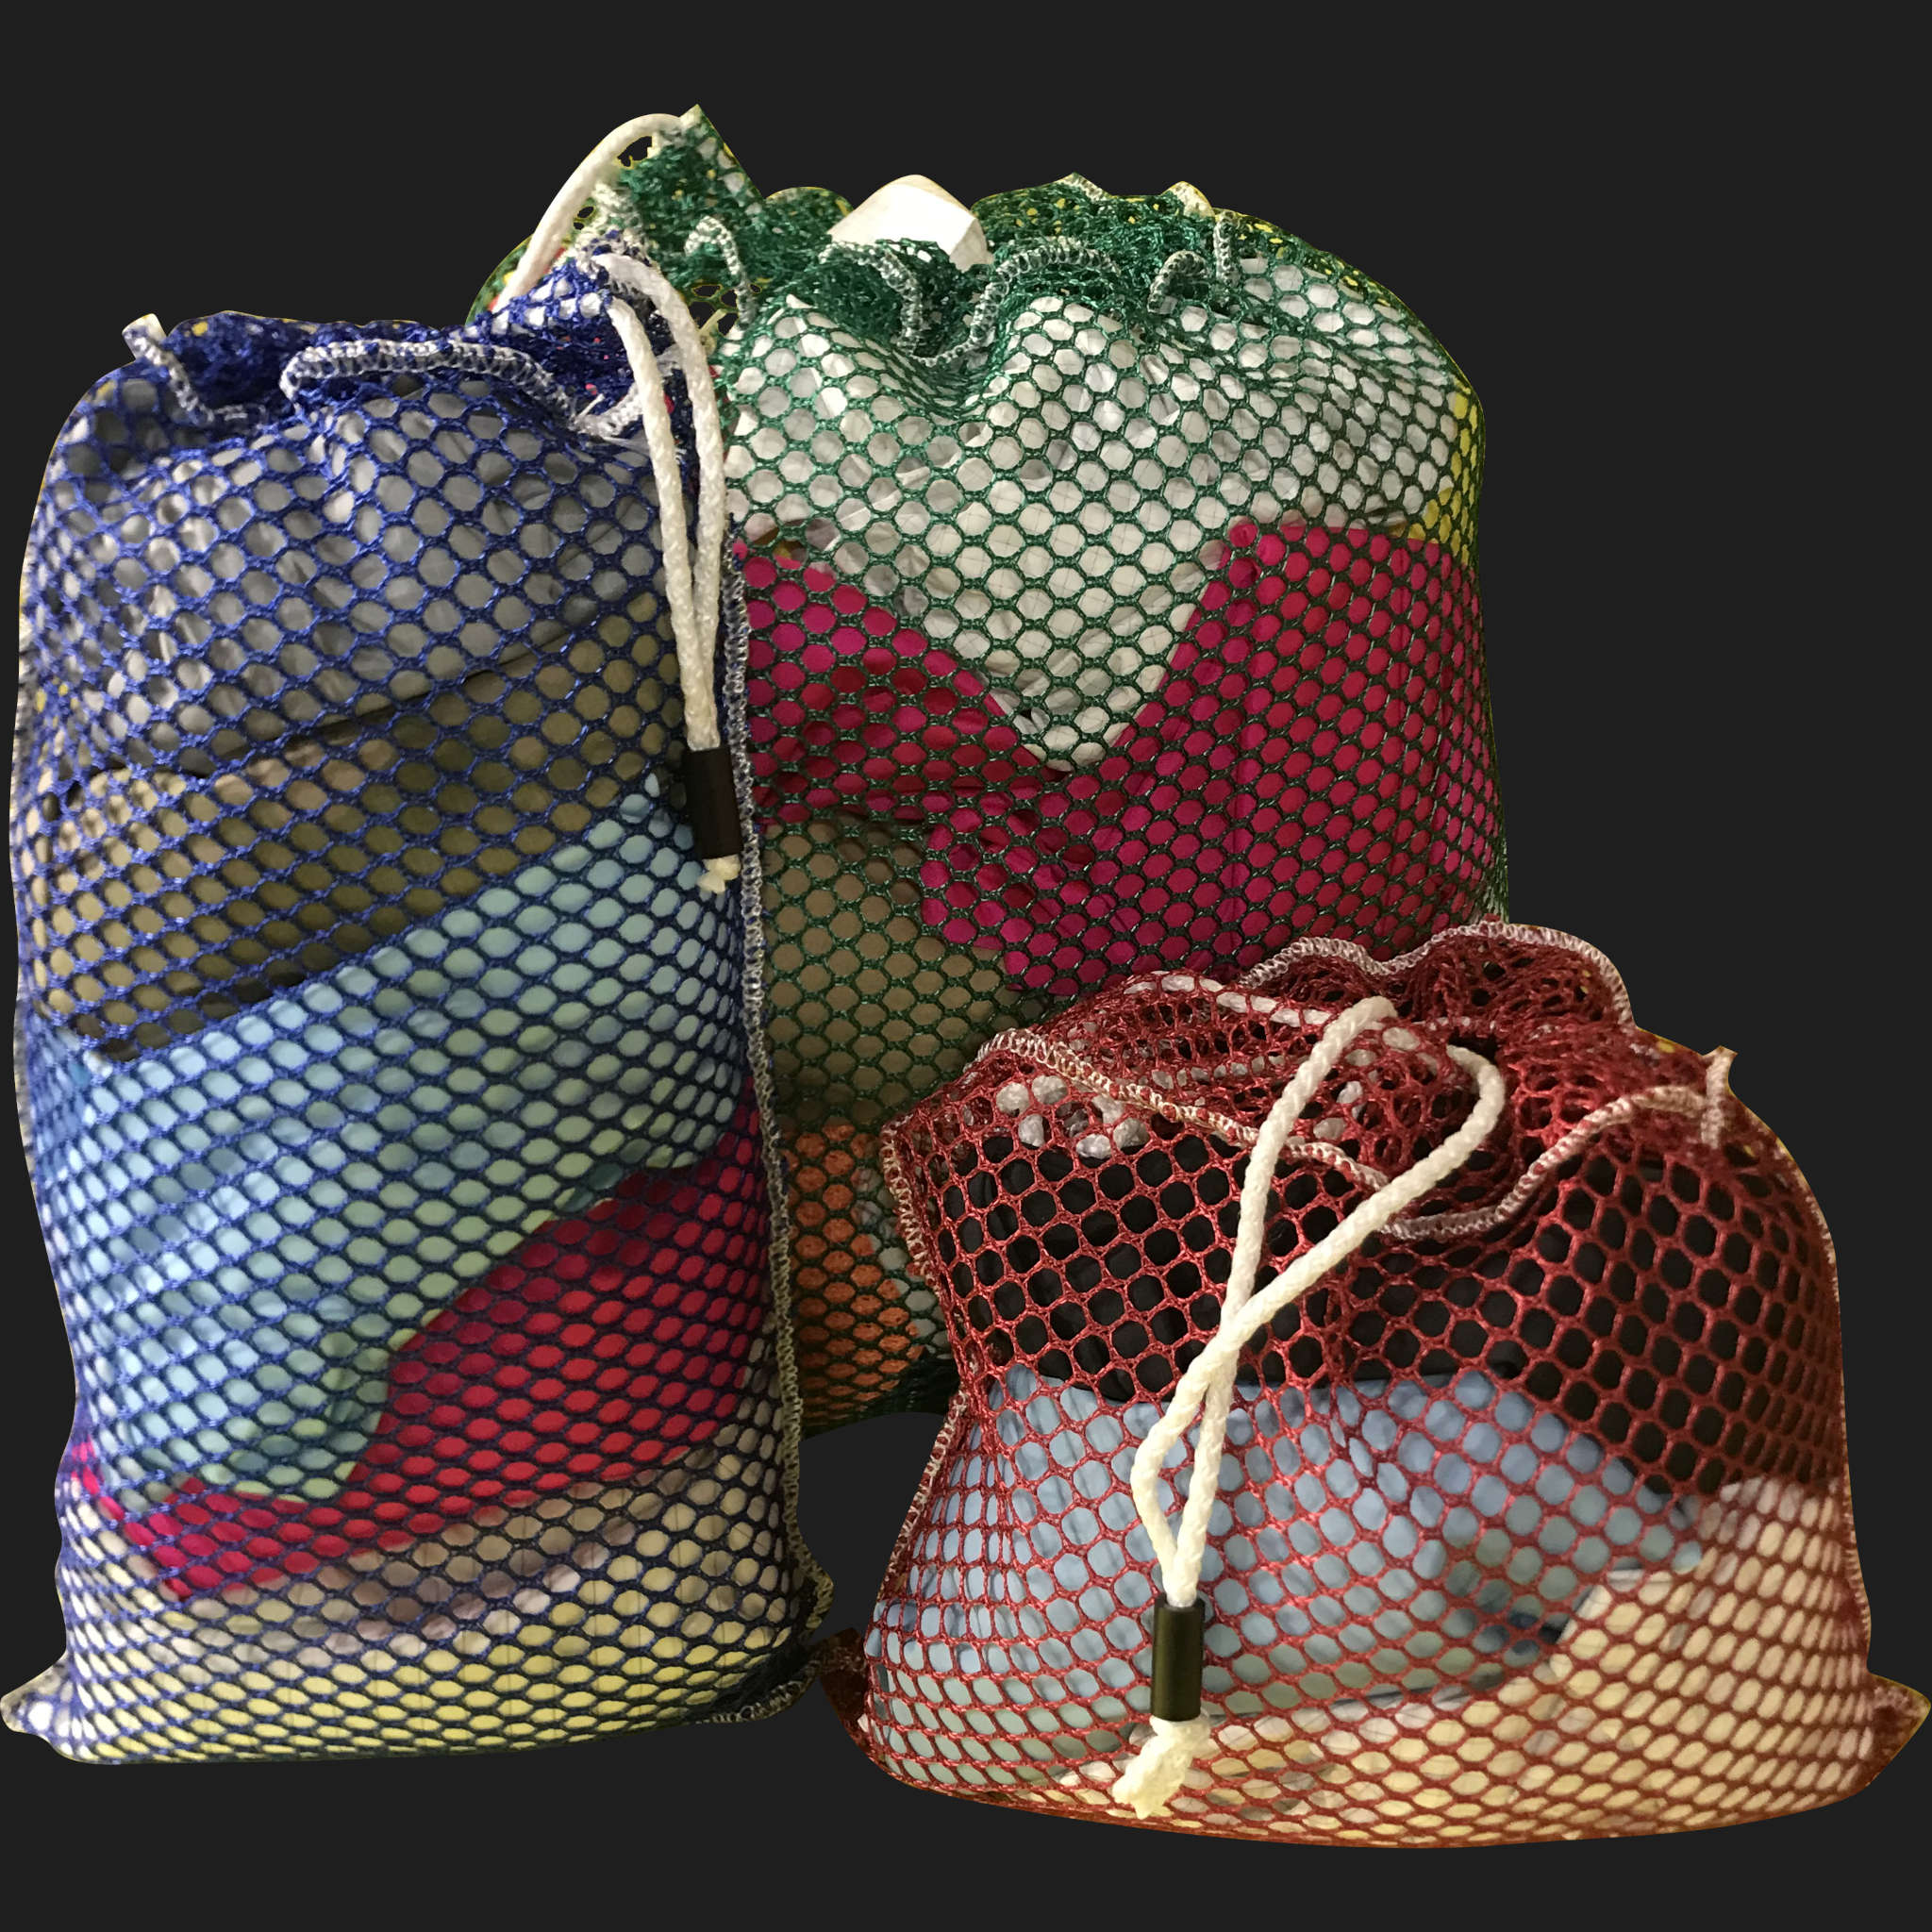 22" x 26" Customized Mesh-Net-Laundry Bags Heavy Duty with Cord and barrellock closure